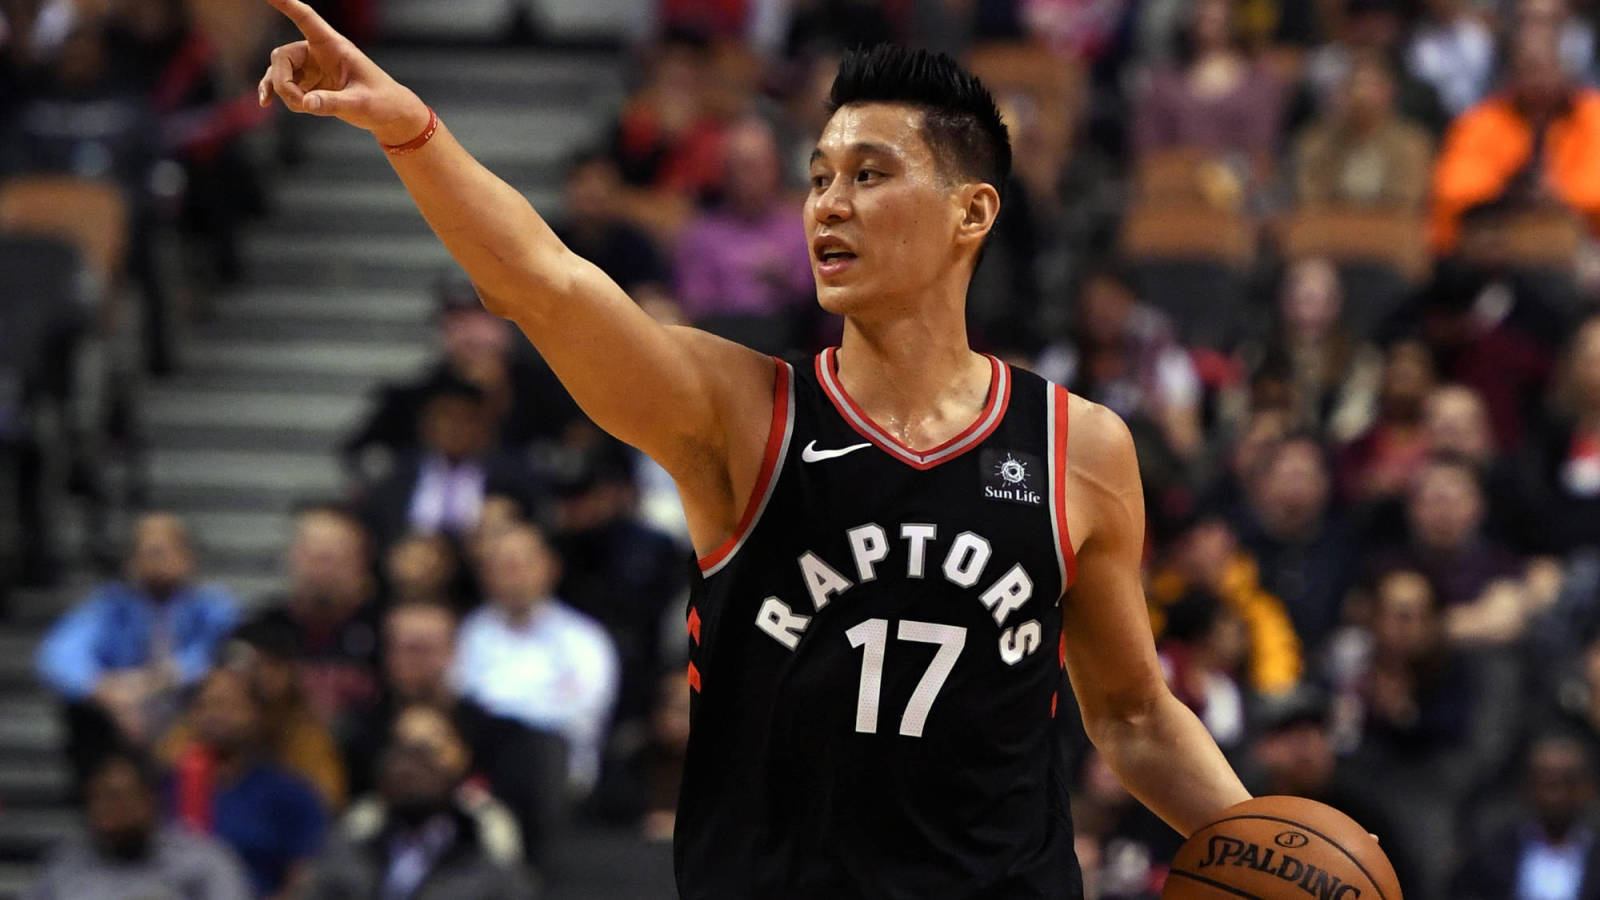 Jeremy Lin hints at retirement after not receiving any NBA offers